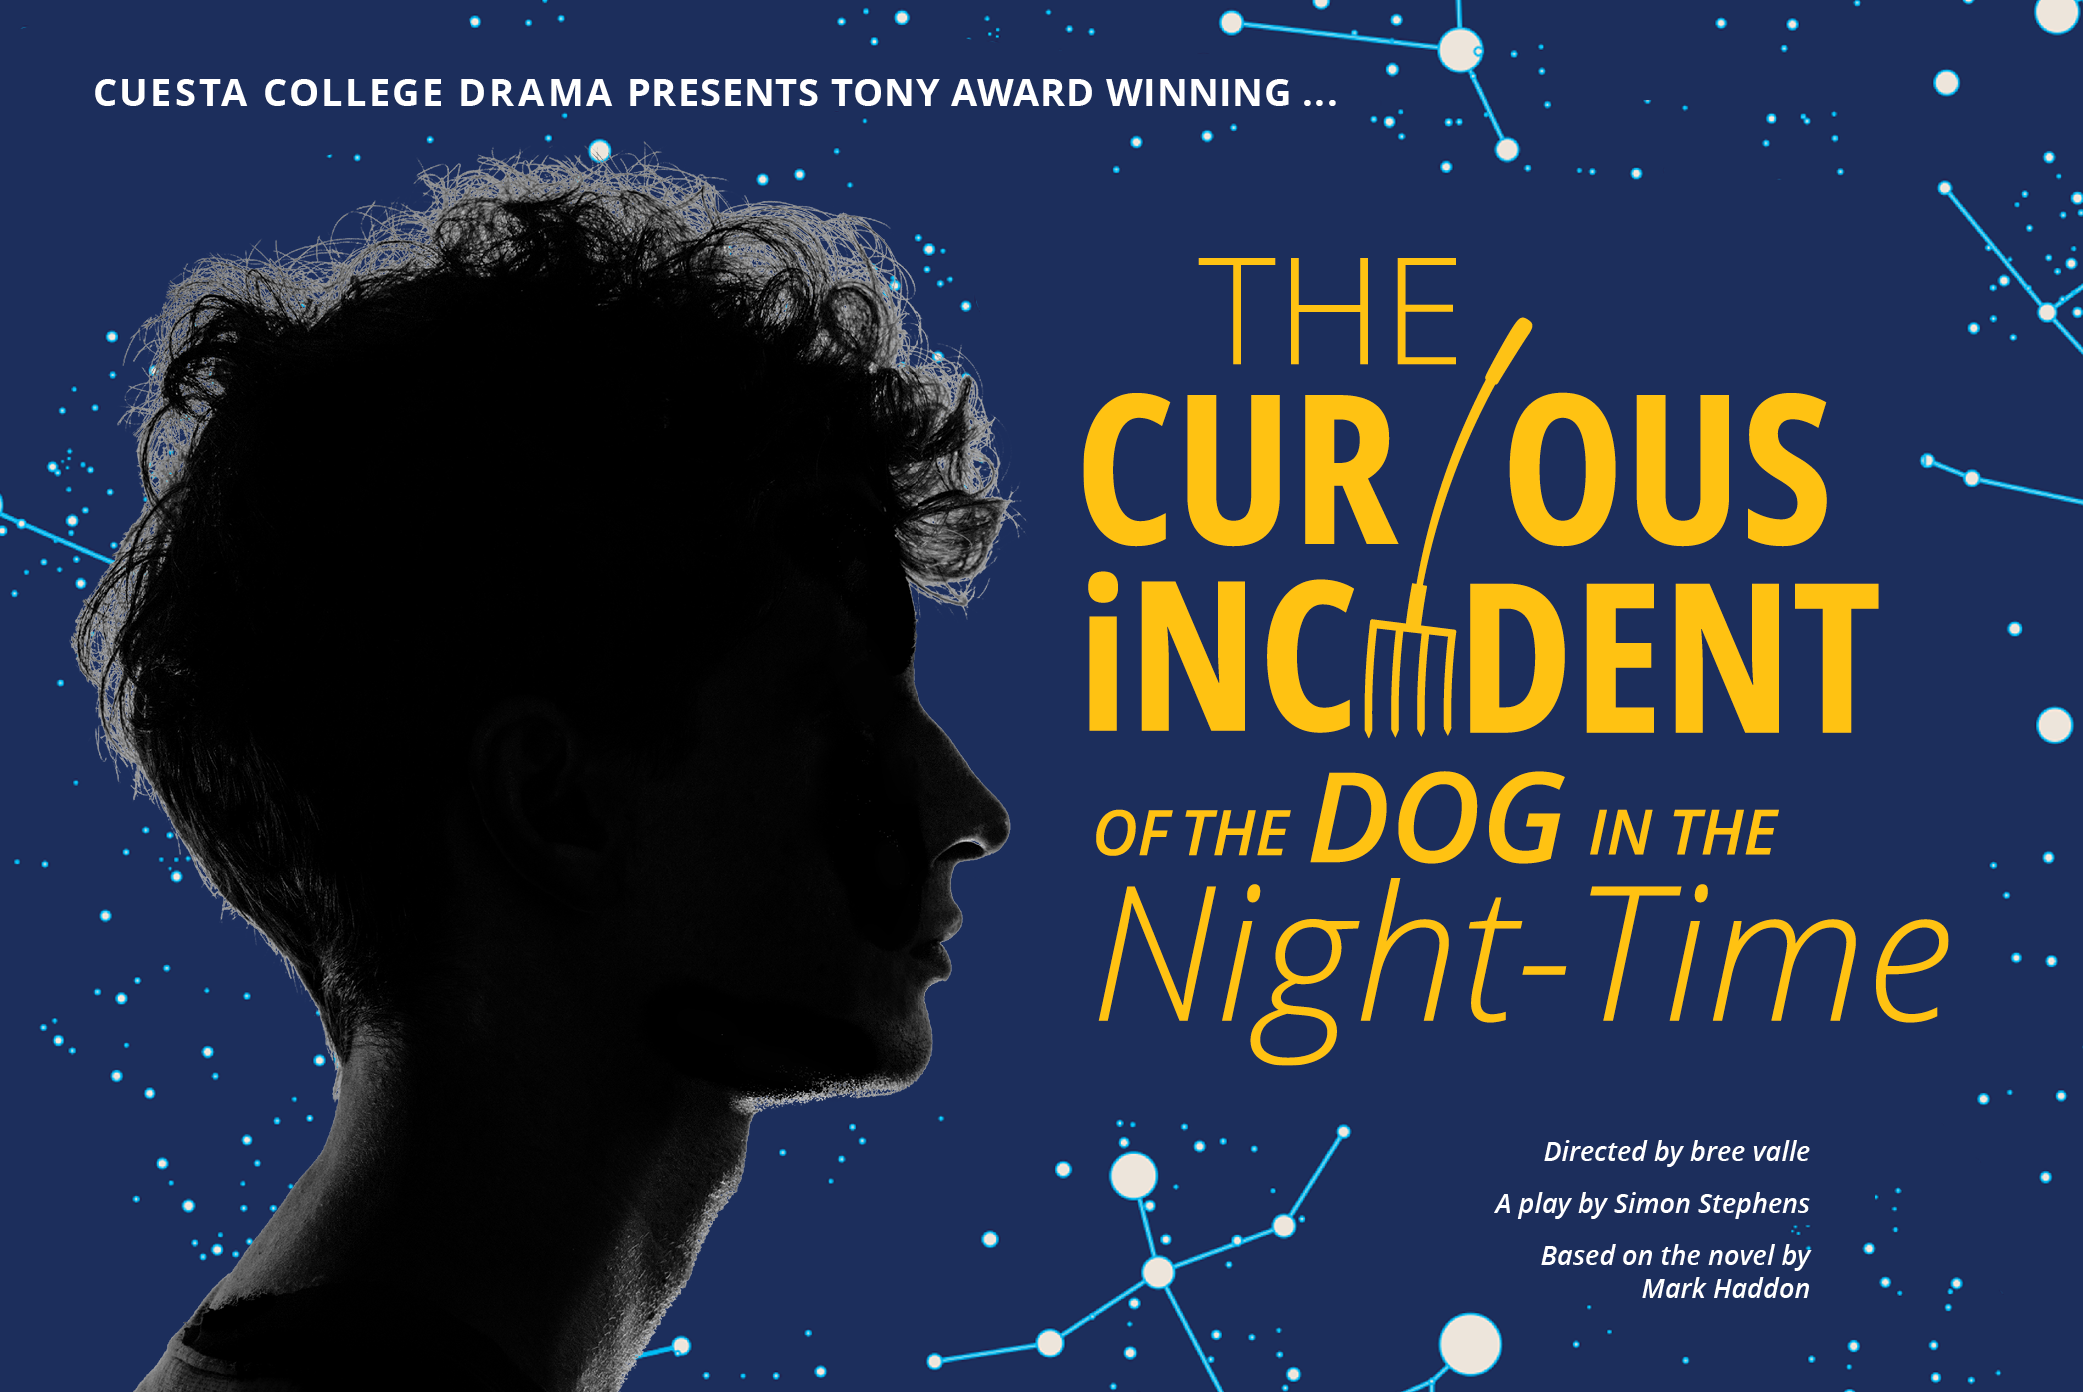 Poster of The Curious Incident of the Dog in the Night-Time